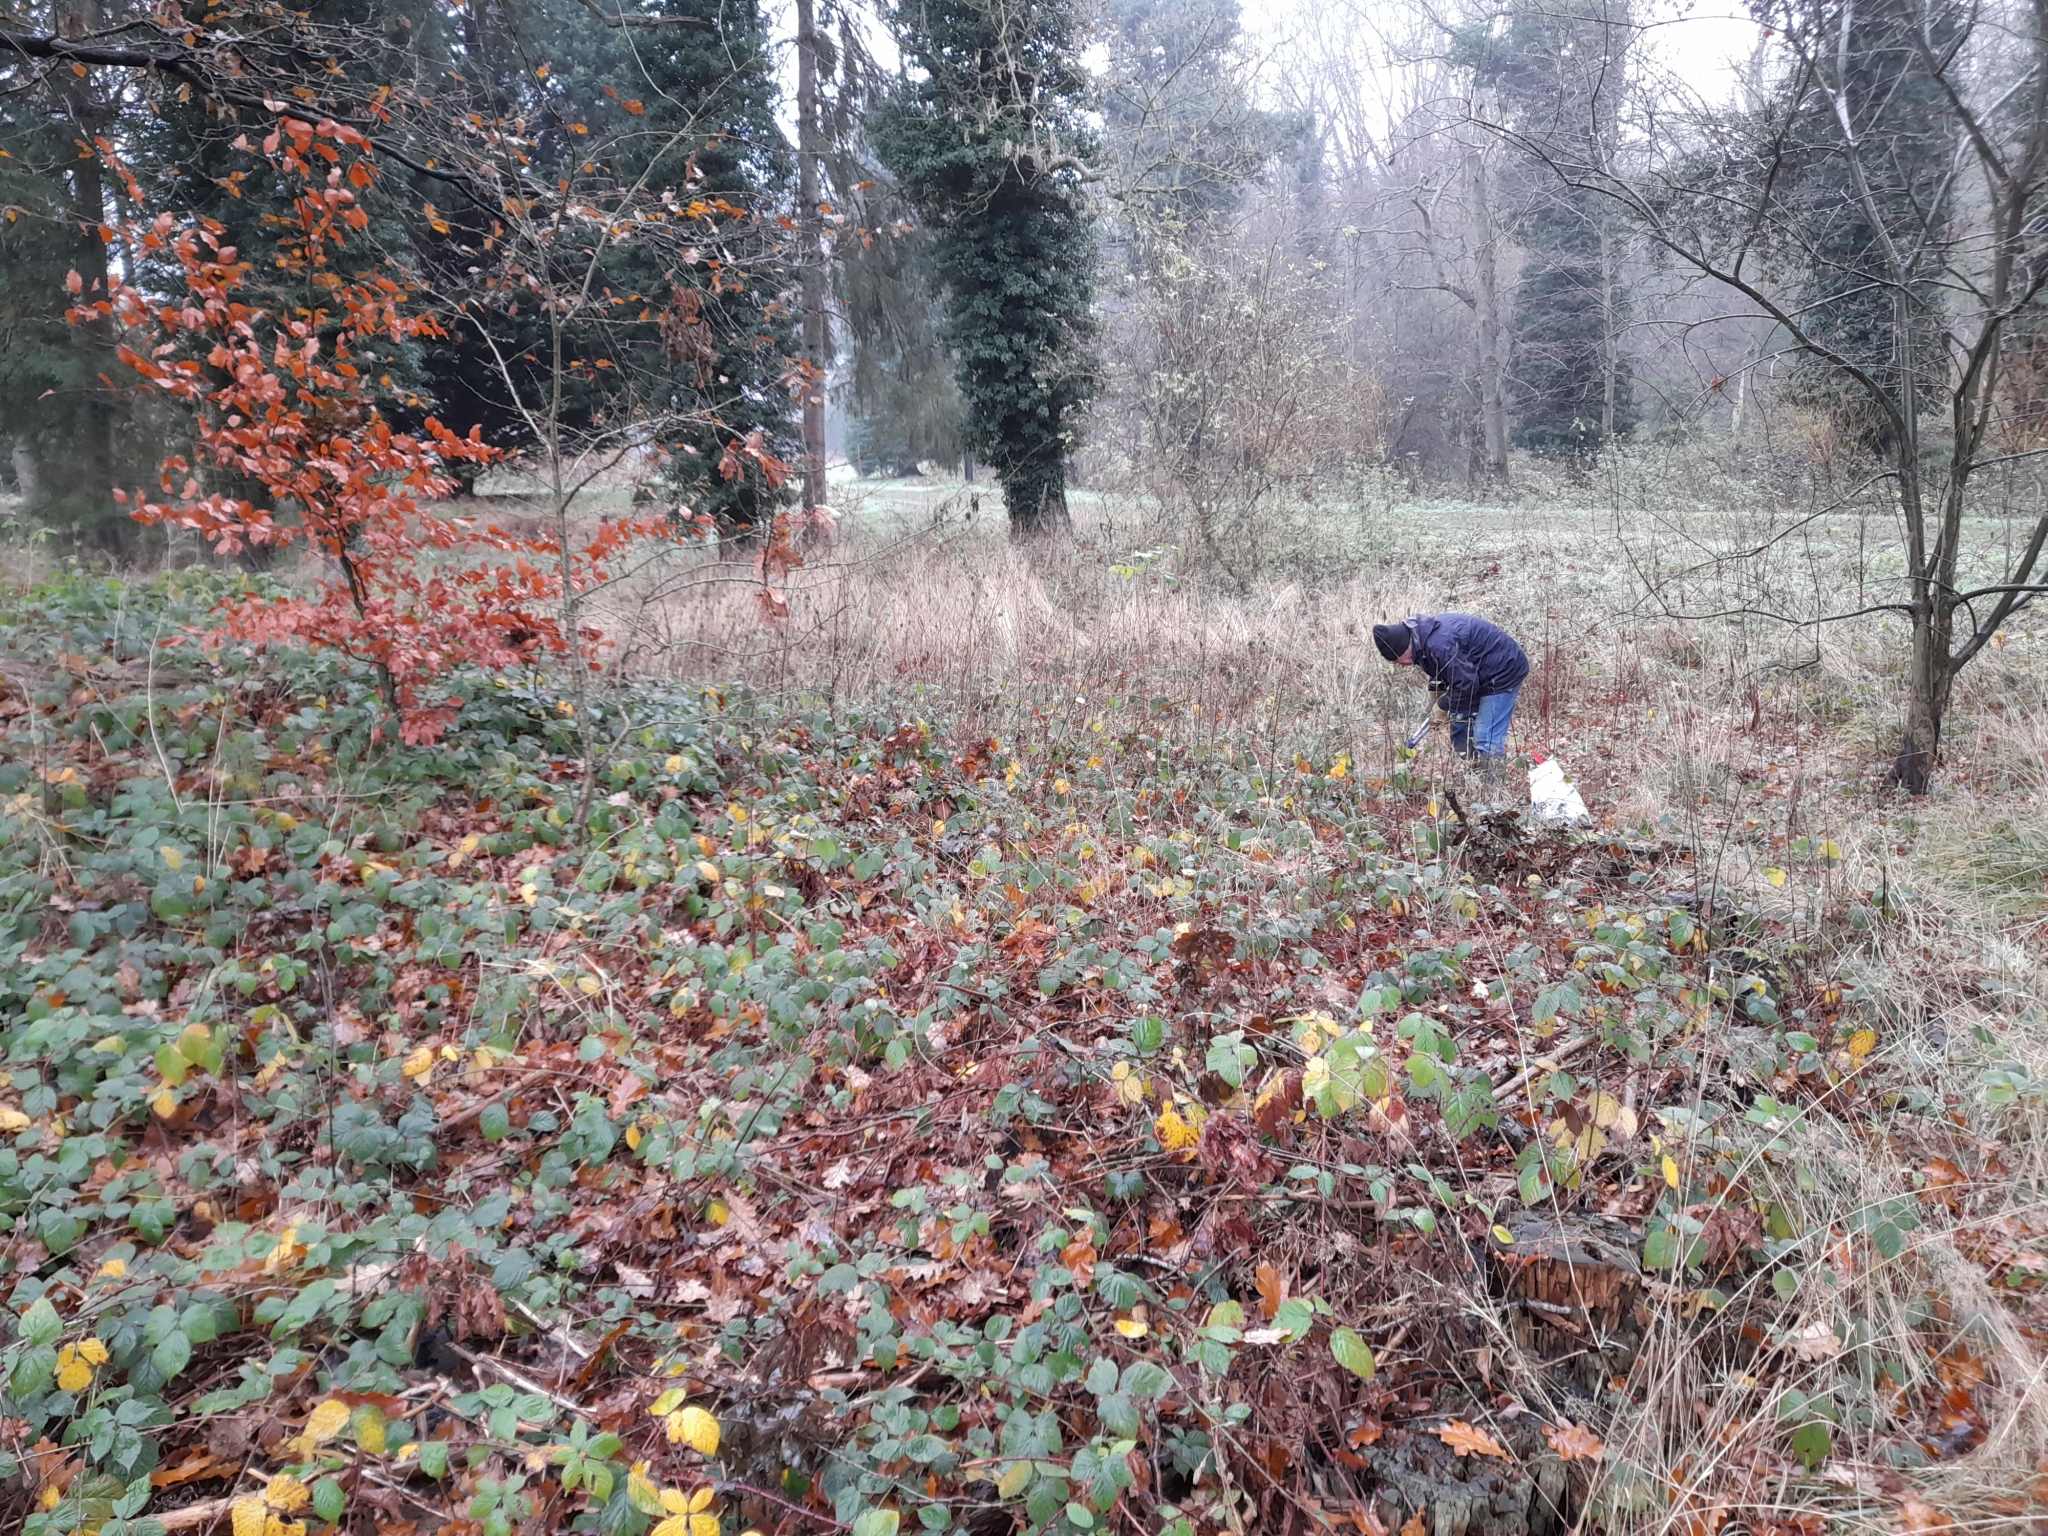 A photo from the FoTF Conservation Event - December 2021 - Self set sapling removal : A volunteer works amongst the scrrub